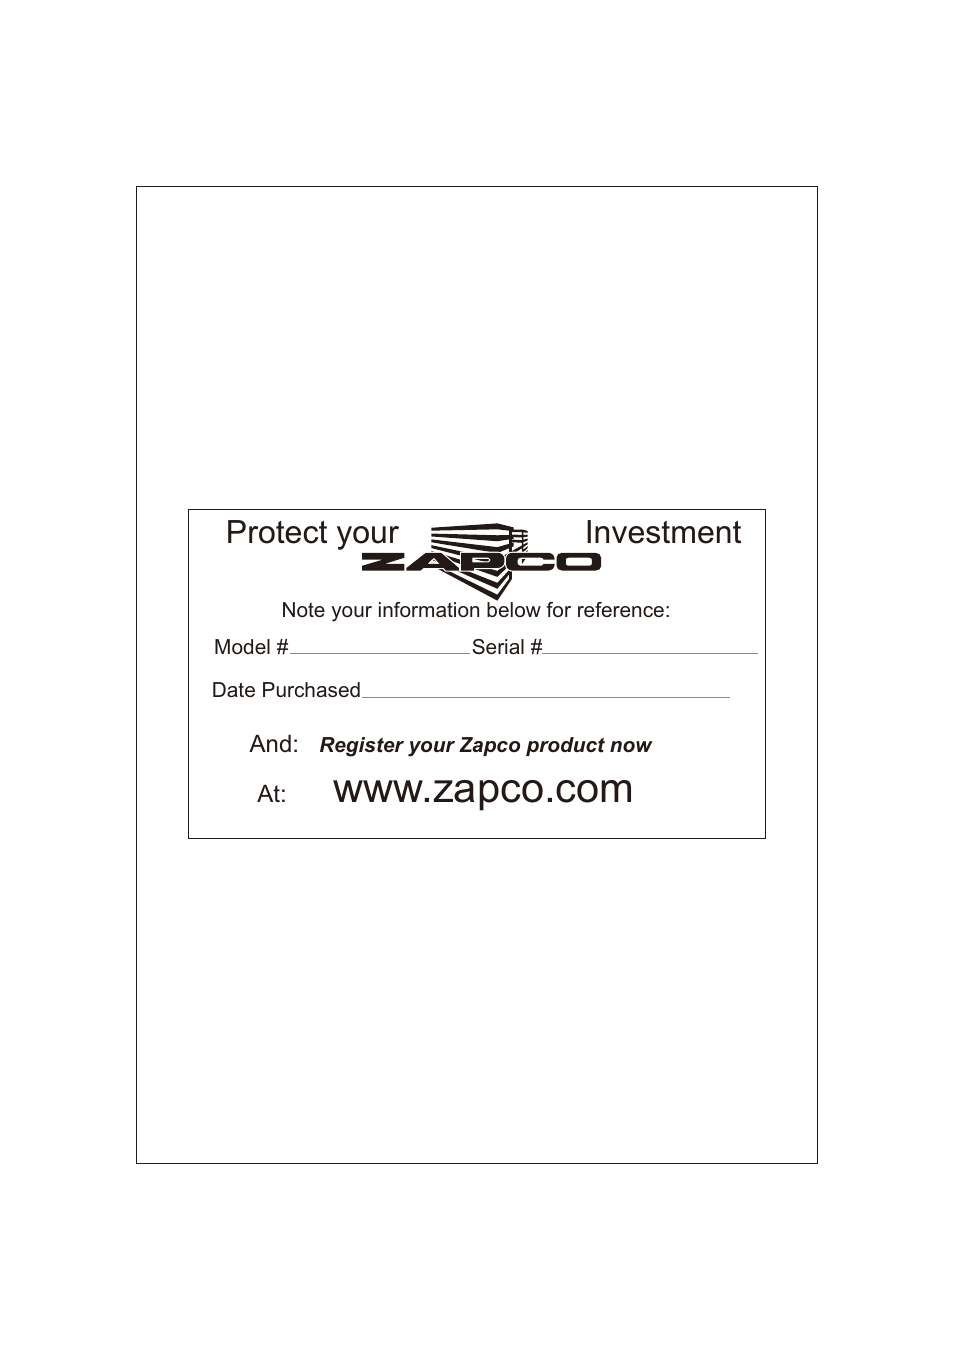 Protect your investment | Zapco Z-series D User Manual | Page 2 / 12